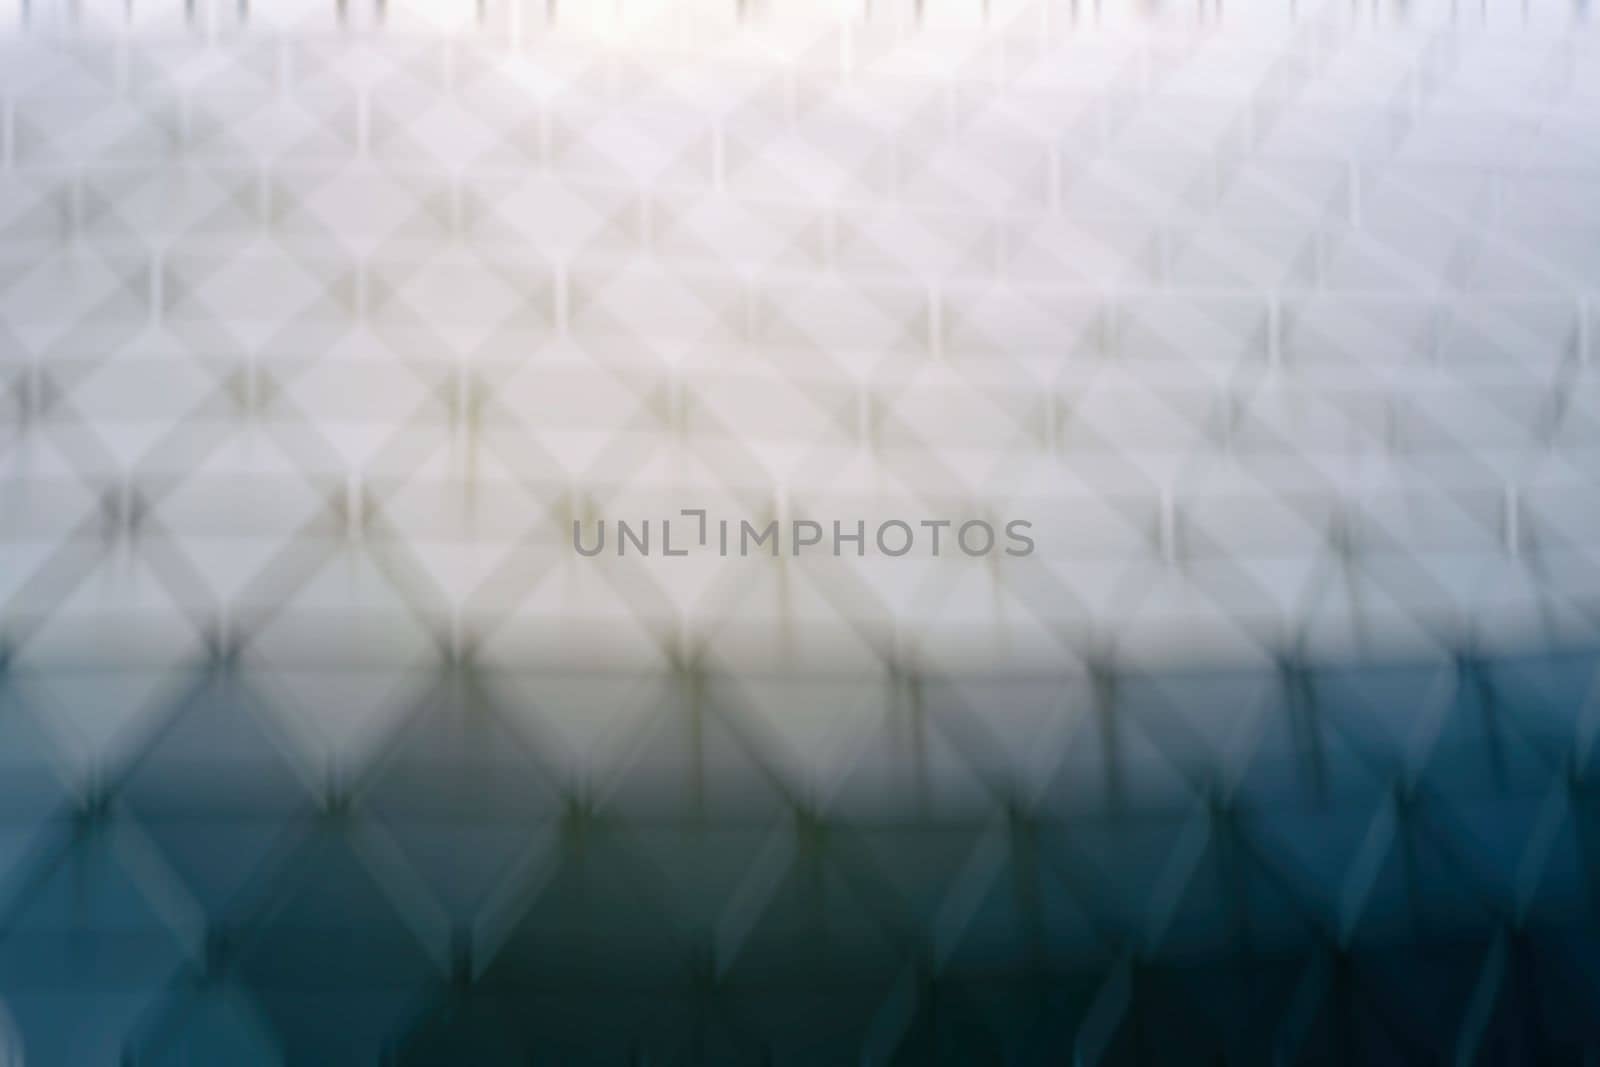 Blurred  Polygon Architecture with Light Leak.